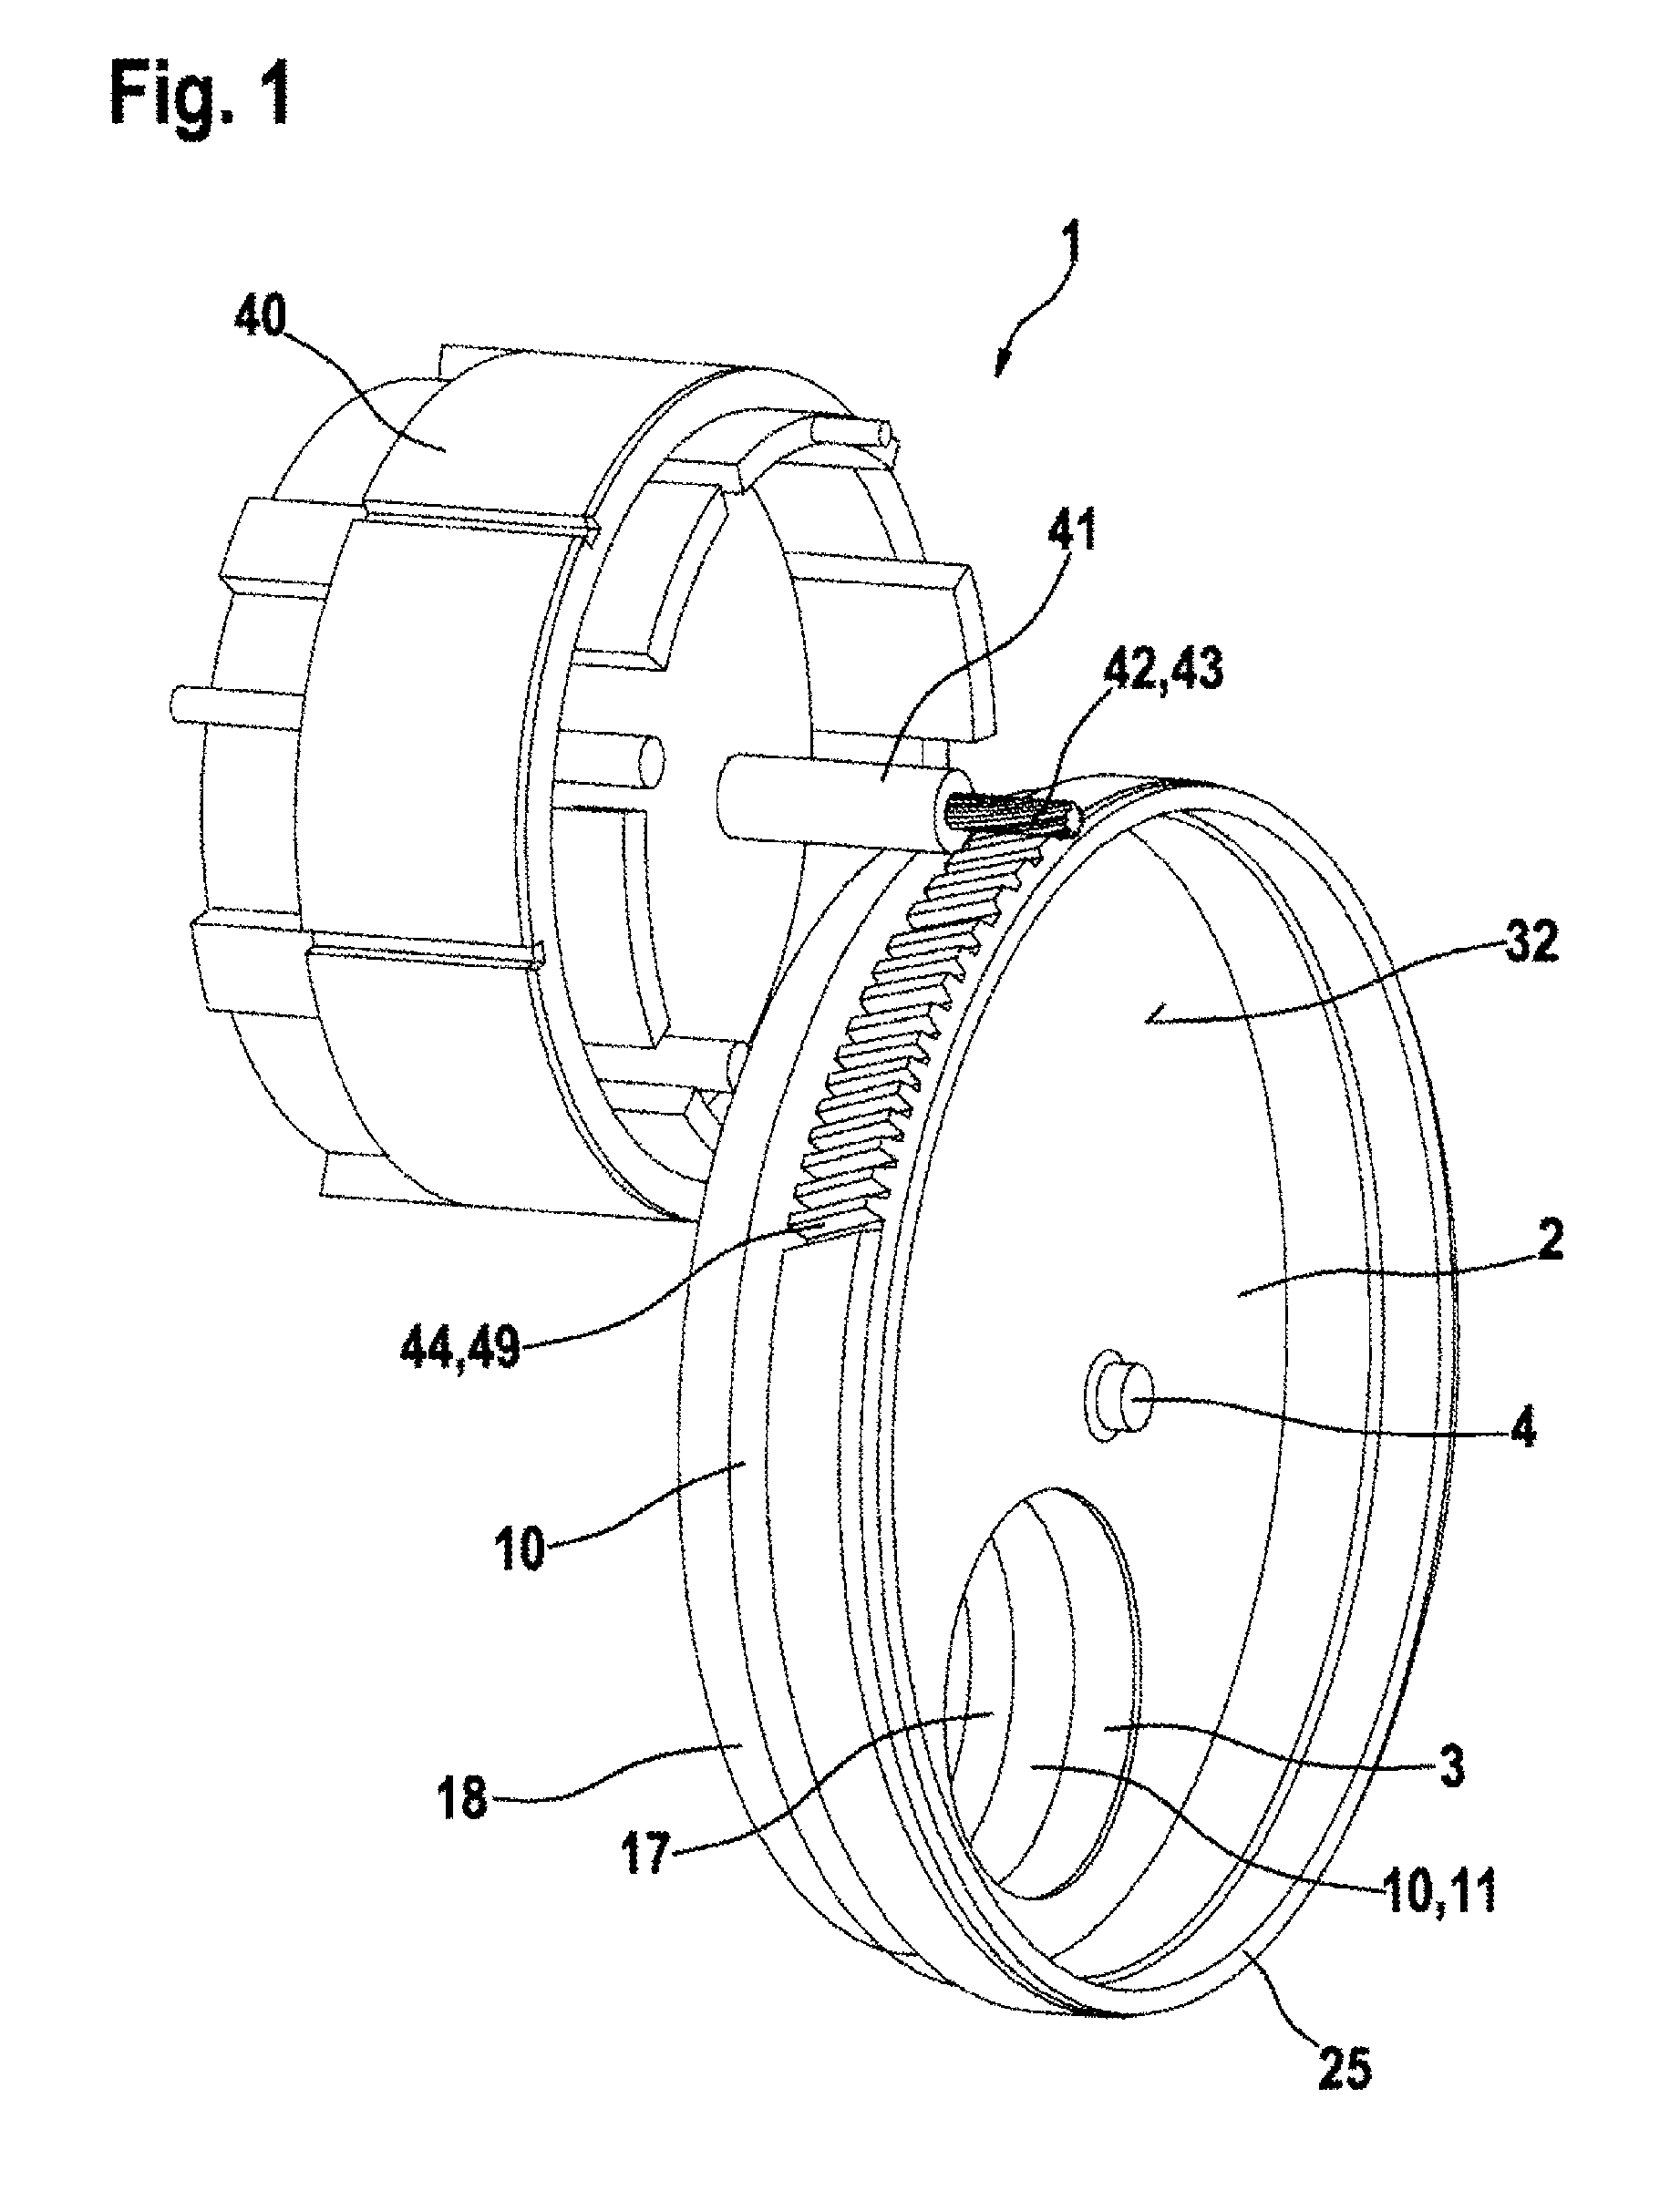 Valve for controlling volume flows